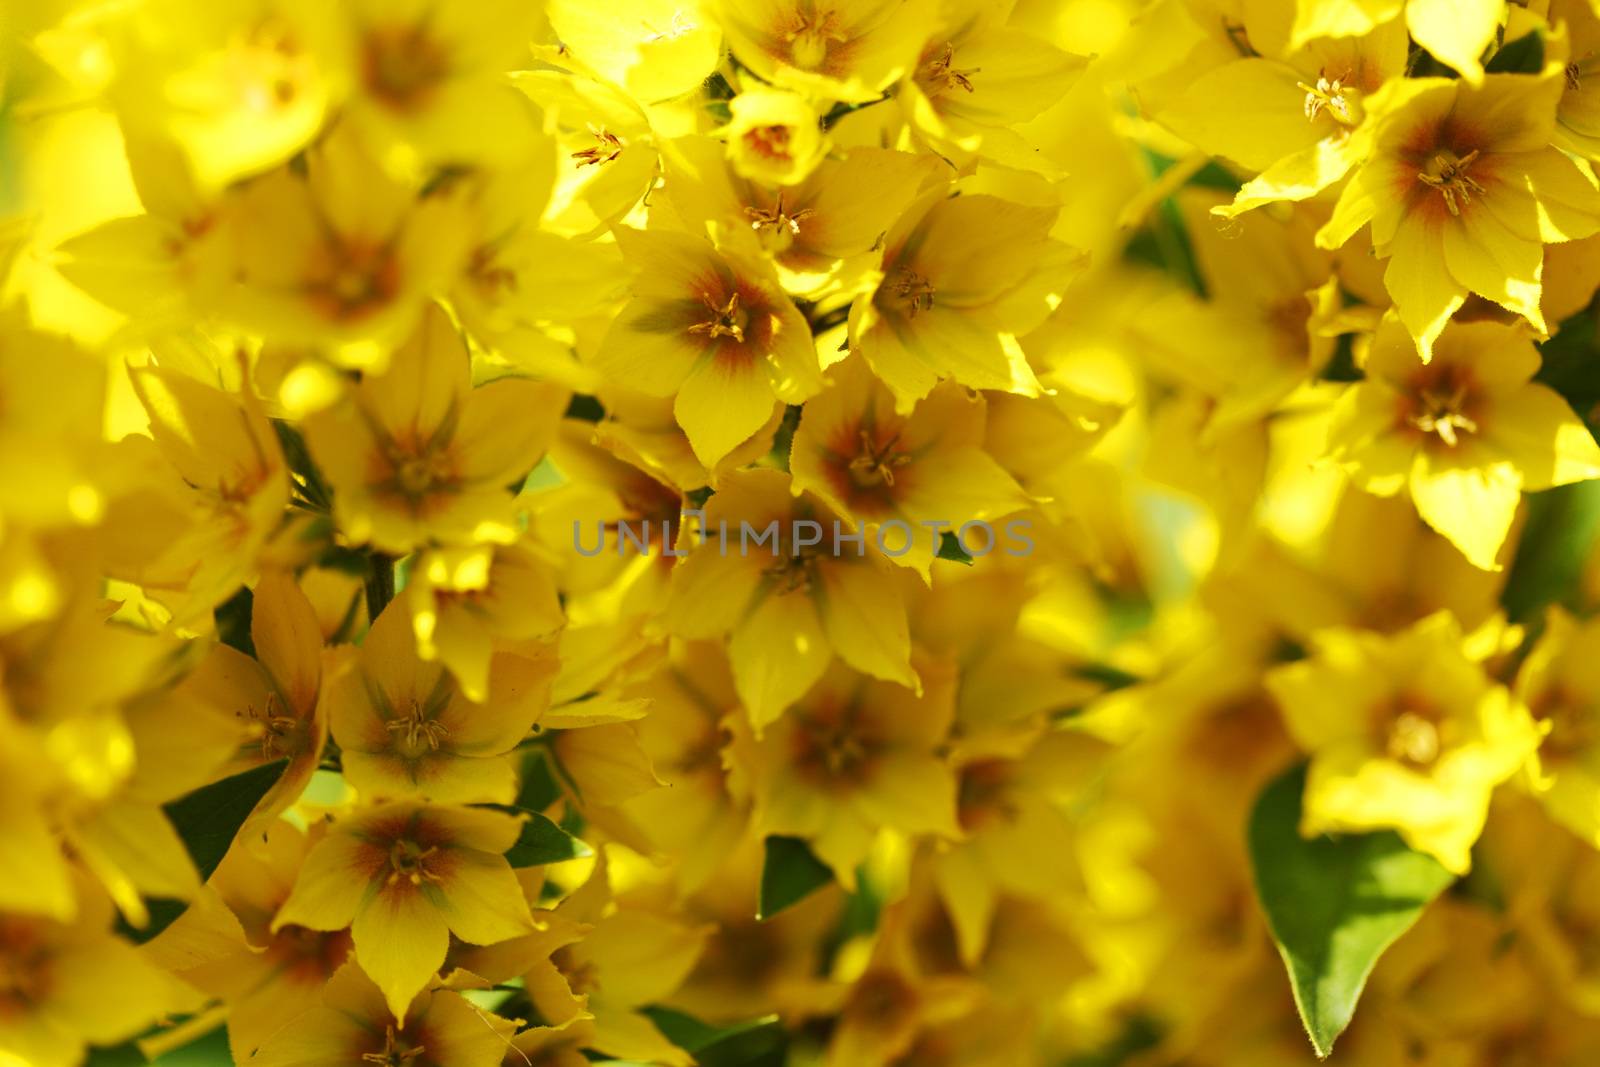 Abstract yellow flowers close-up outdoors